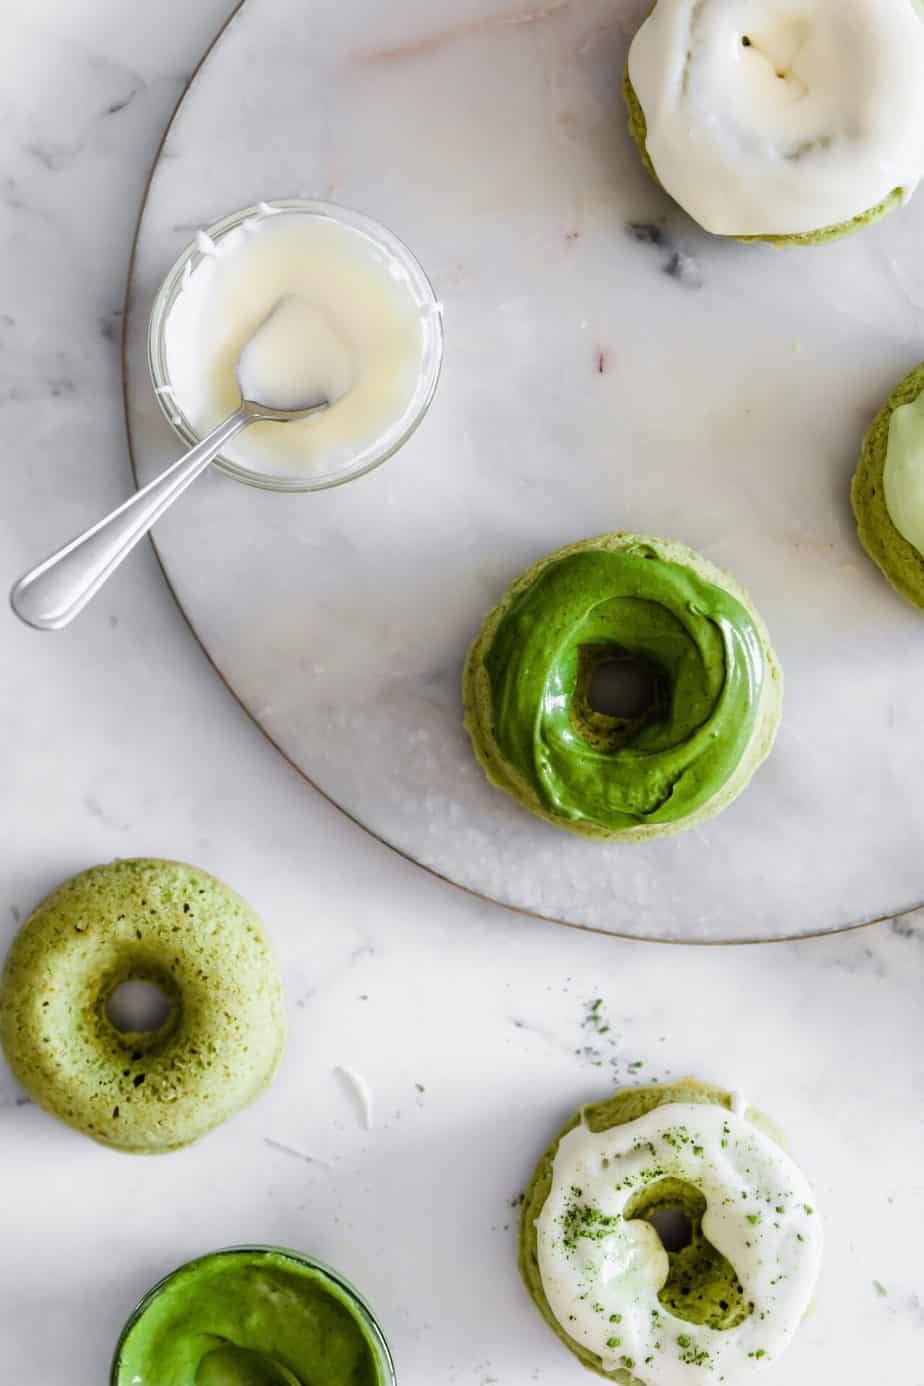 These easy Matcha Baked Donuts with Cream Cheese Glaze are perfectly soft, sweet, & simple to make. And let's not forget, they are also oh-so-pretty!